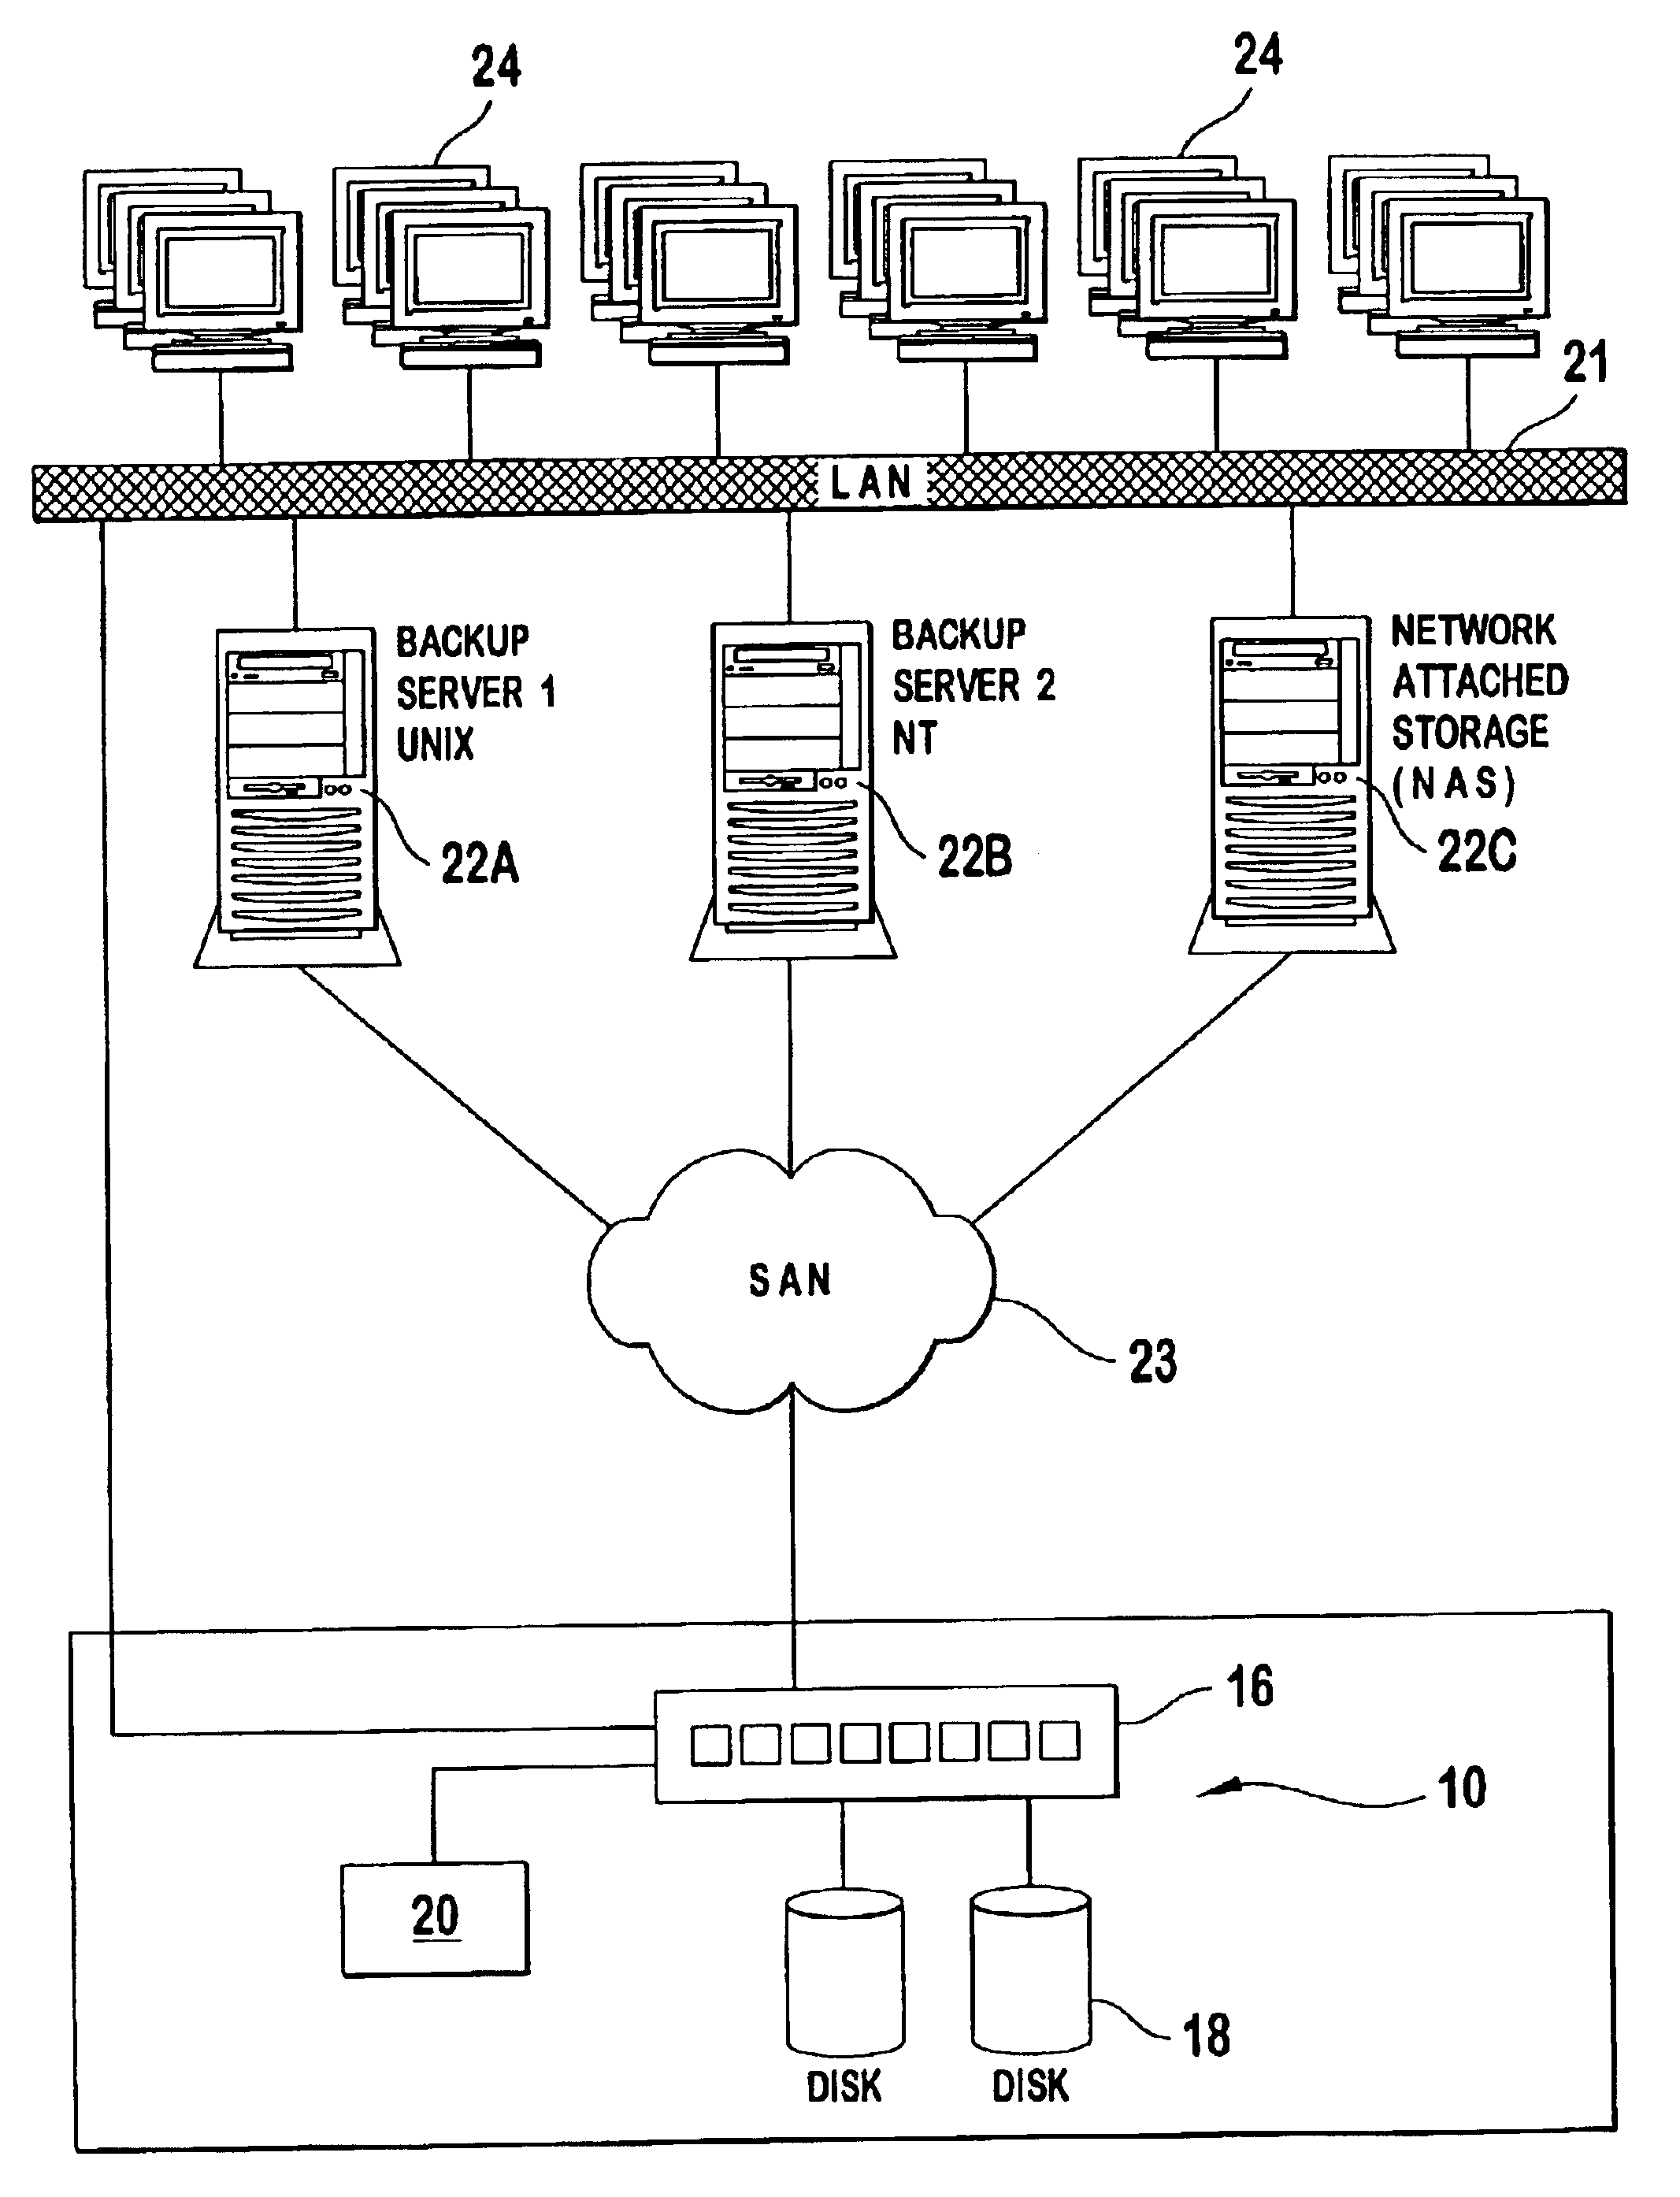 Method of importing data from a physical data storage device into a virtual tape library